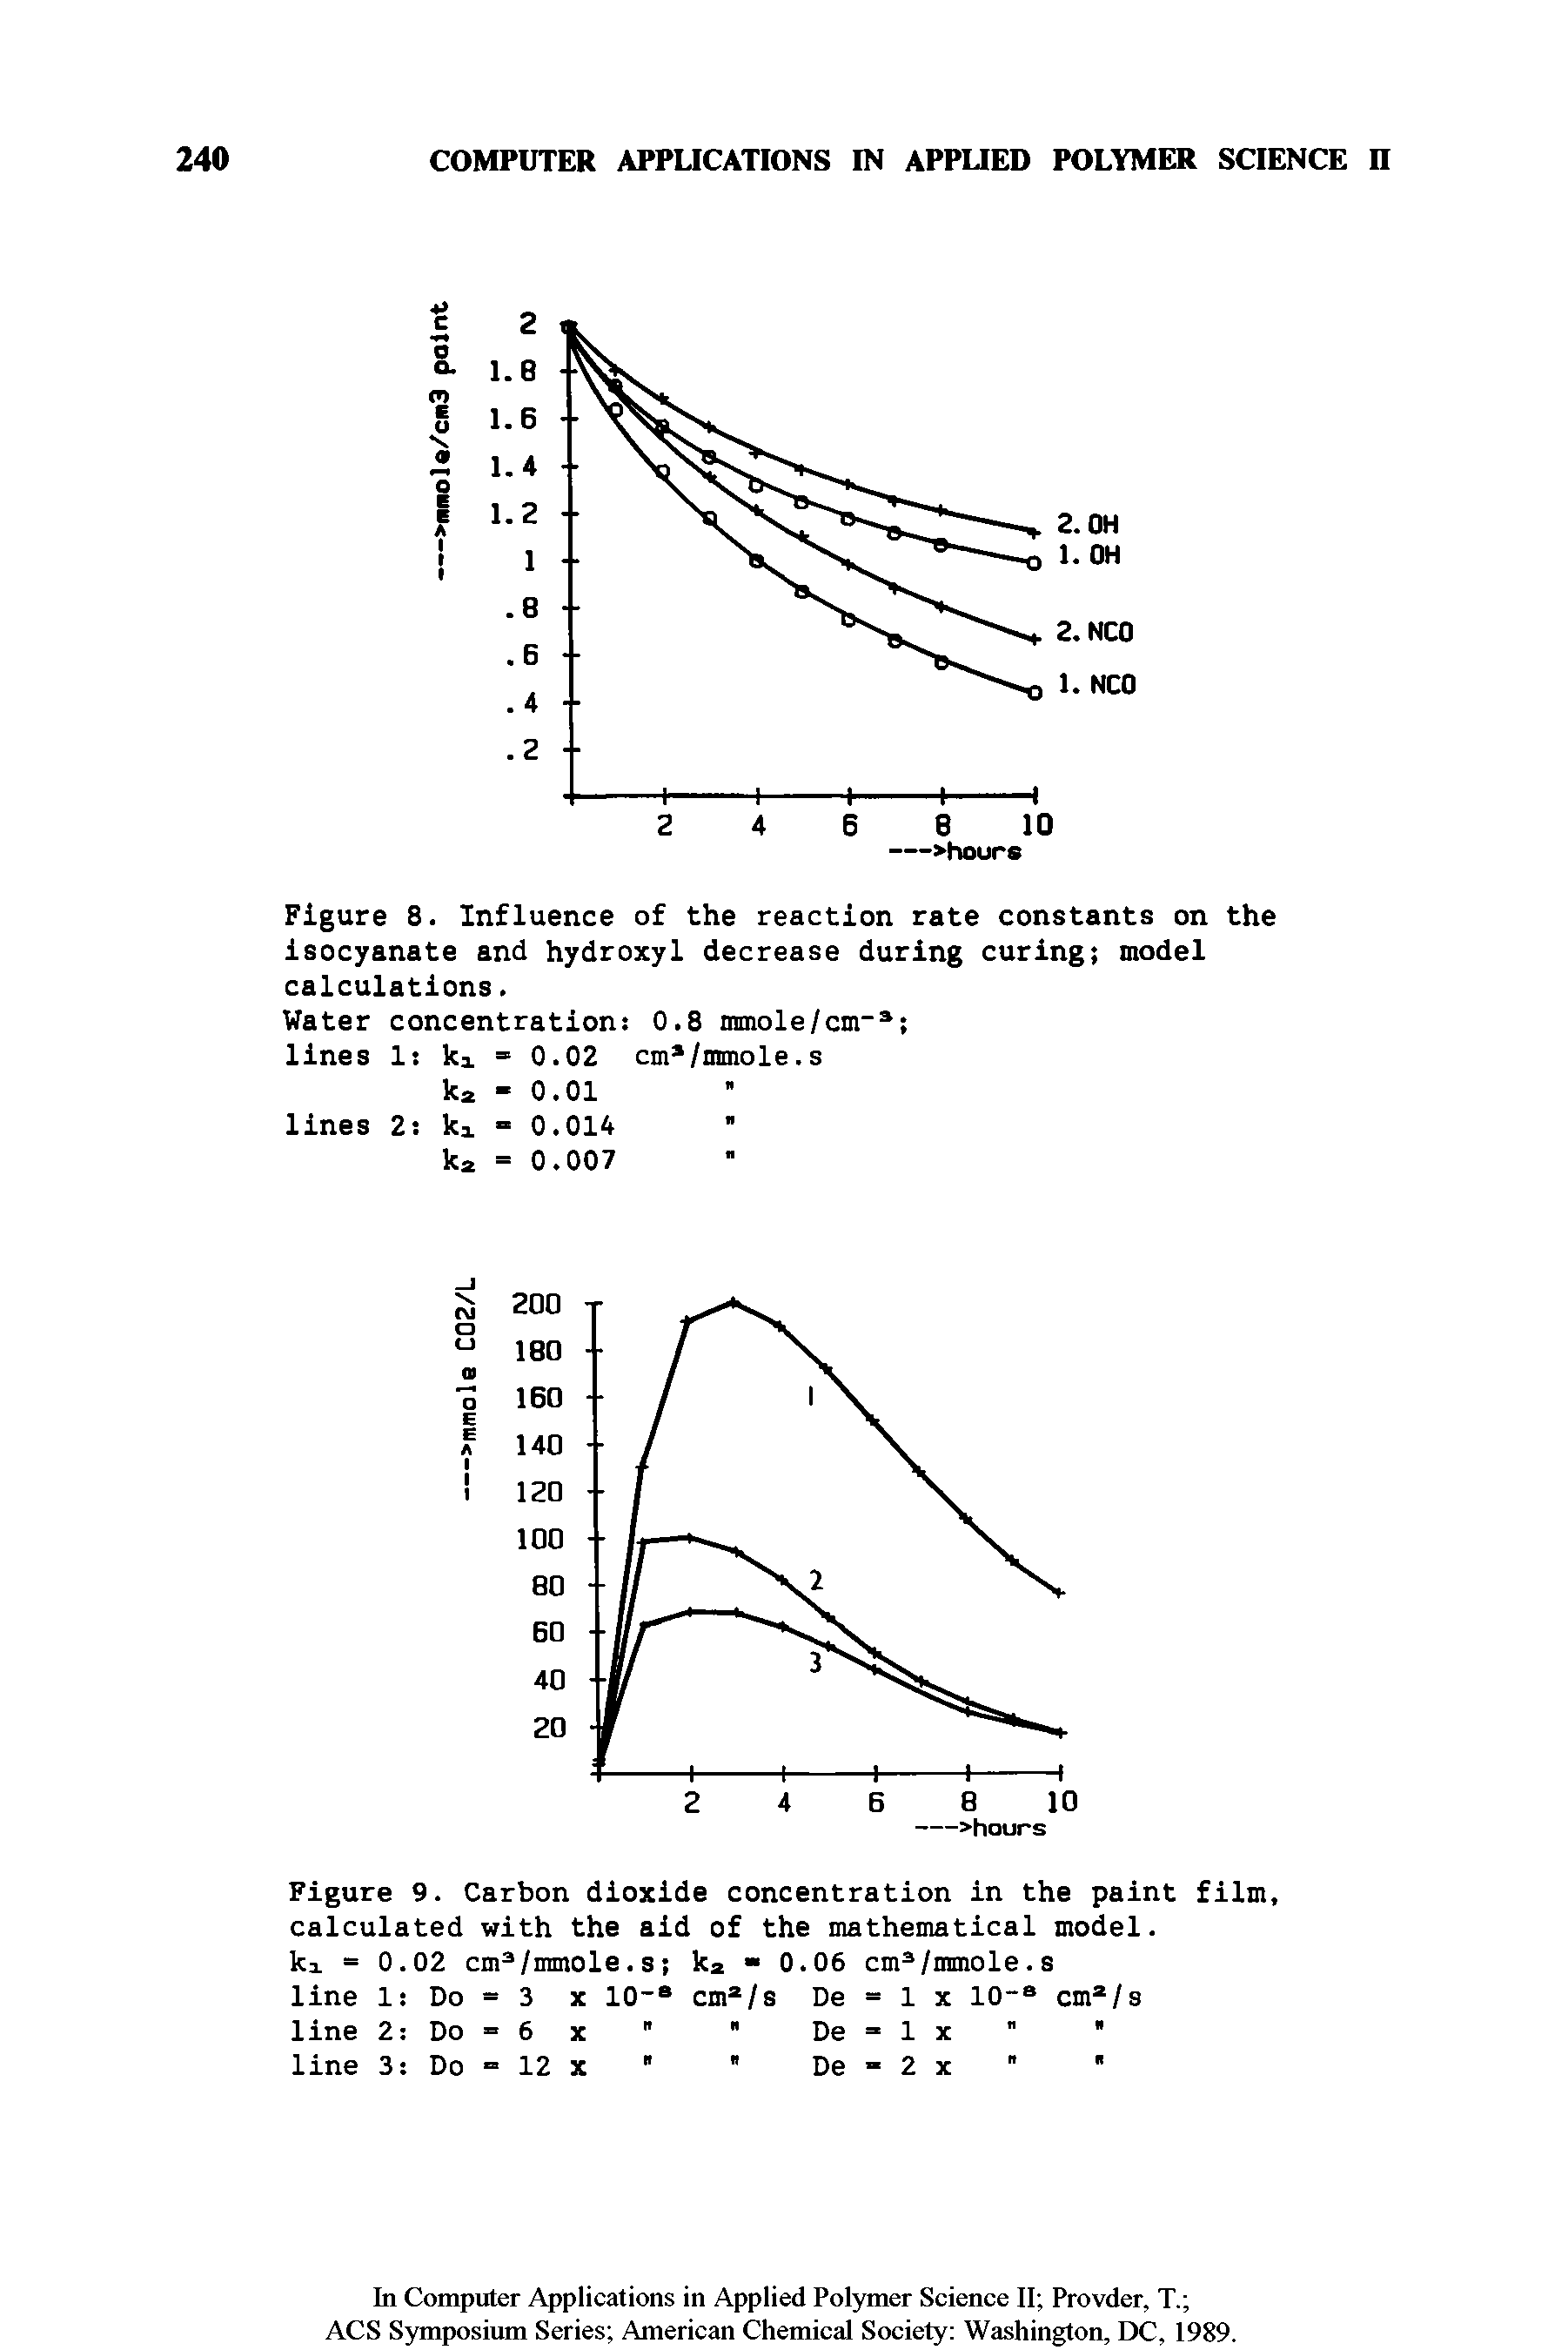 Figure 8. Influence of the reaction rate constants on the isocyanate and hydroxyl decrease during curing model calculations.